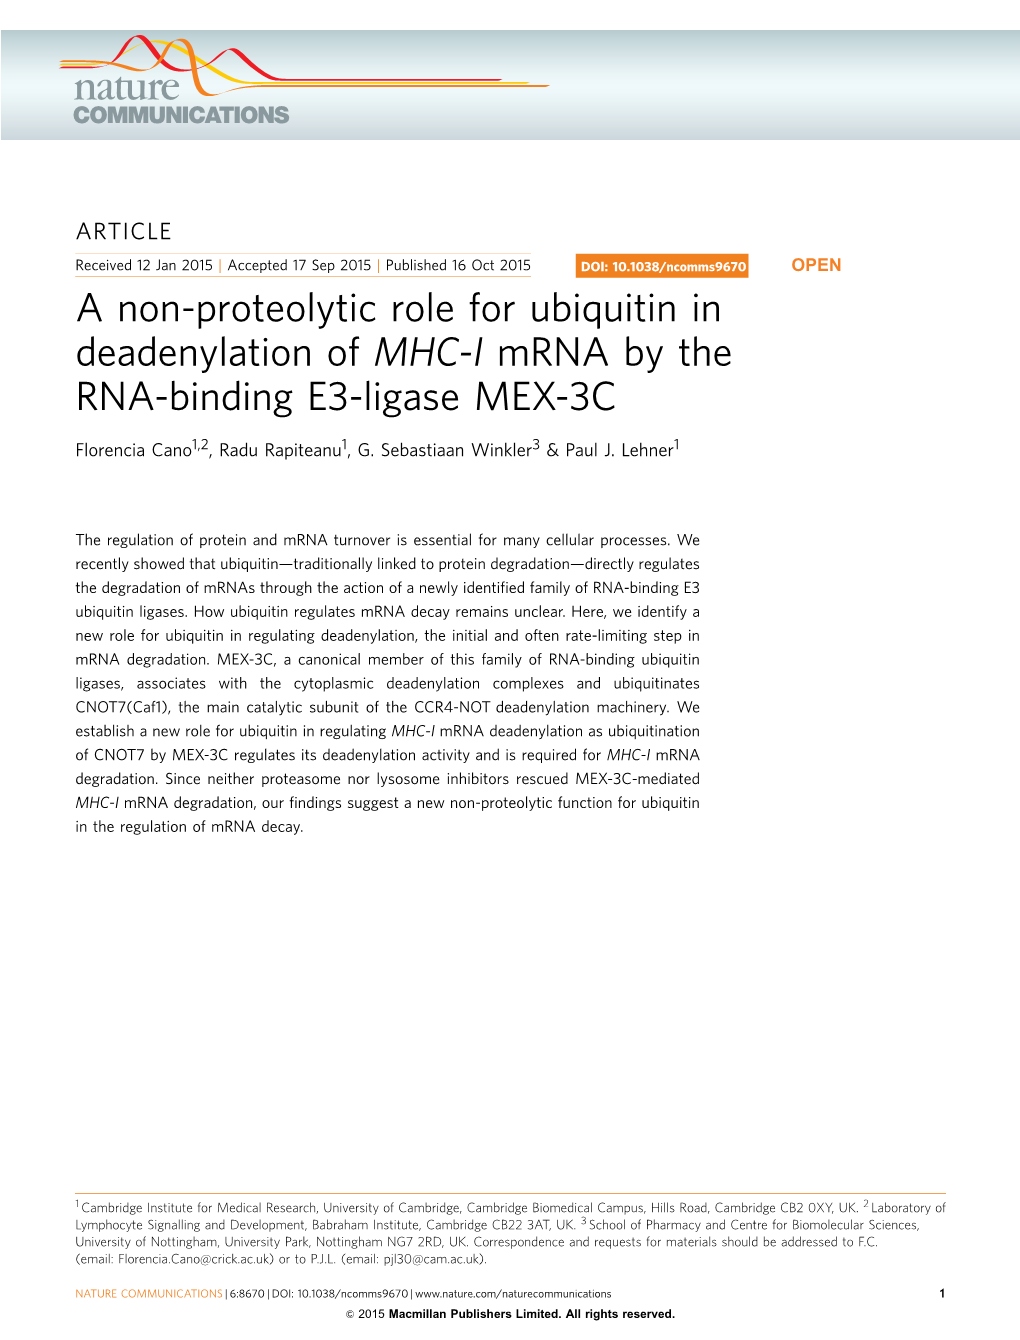 A Non-Proteolytic Role for Ubiquitin in Deadenylation of MHC-I Mrna by the RNA-Binding E3-Ligase MEX-3C